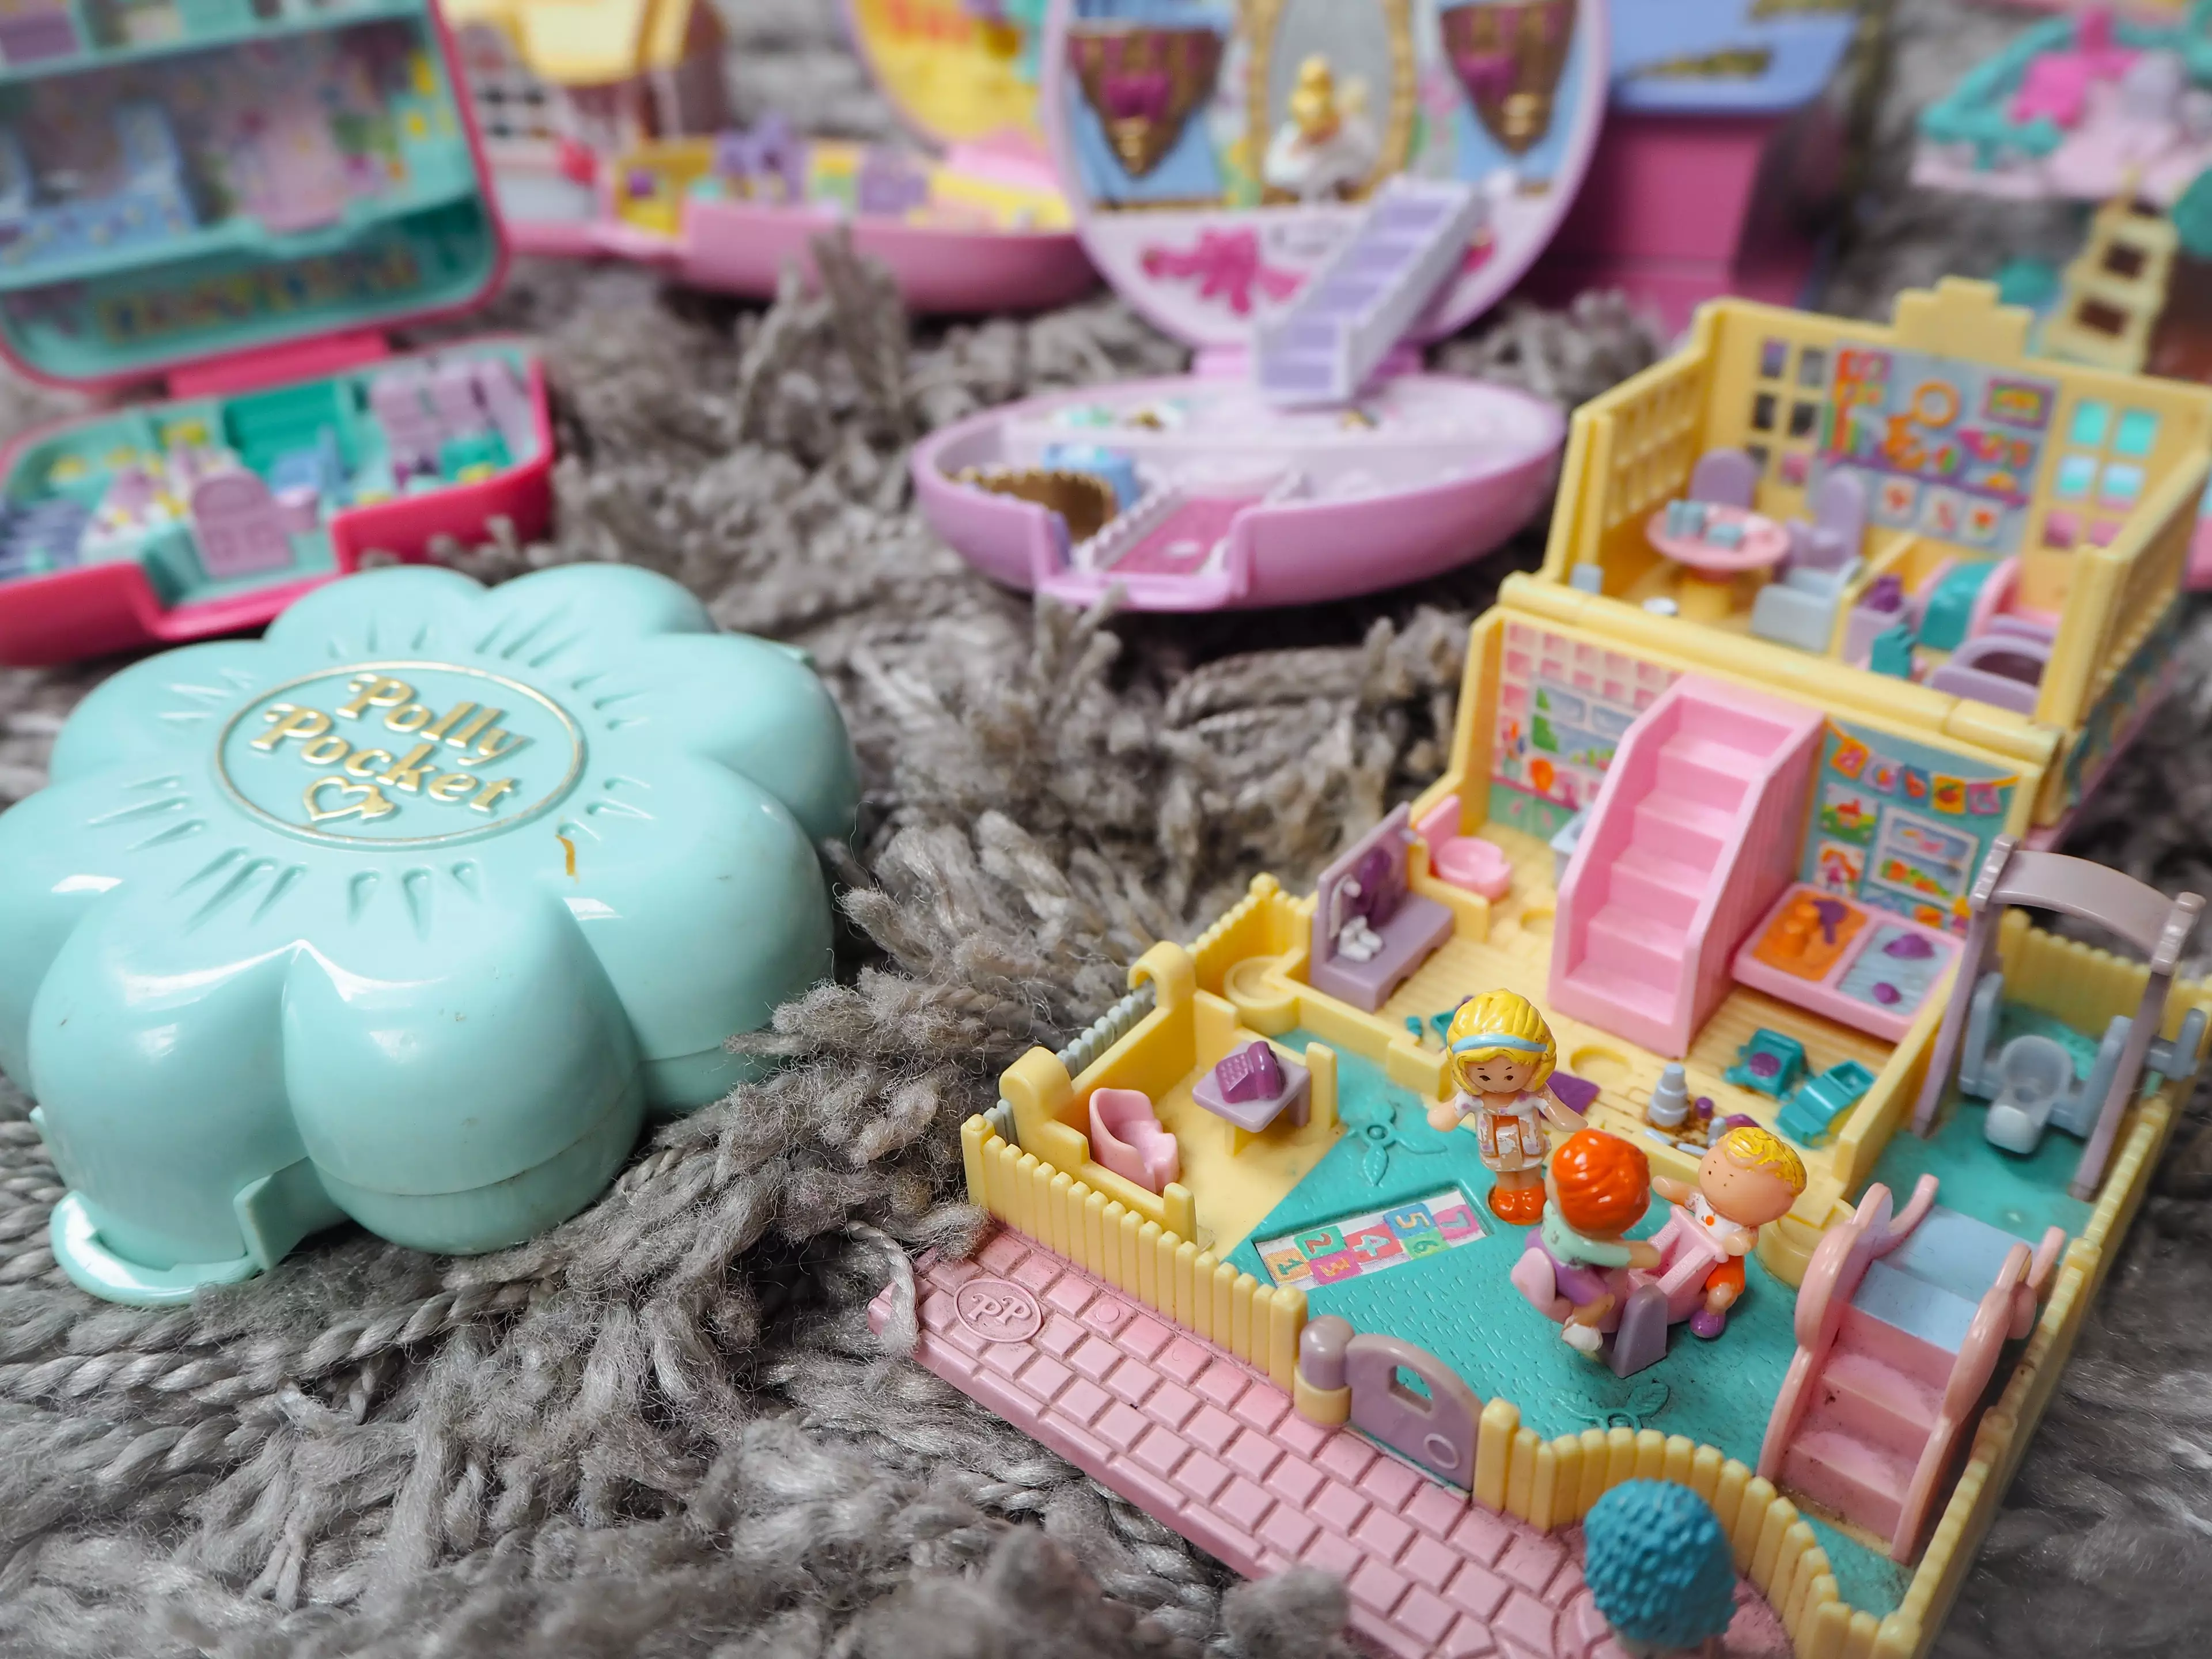 Polly Pocket was a 90s fave (